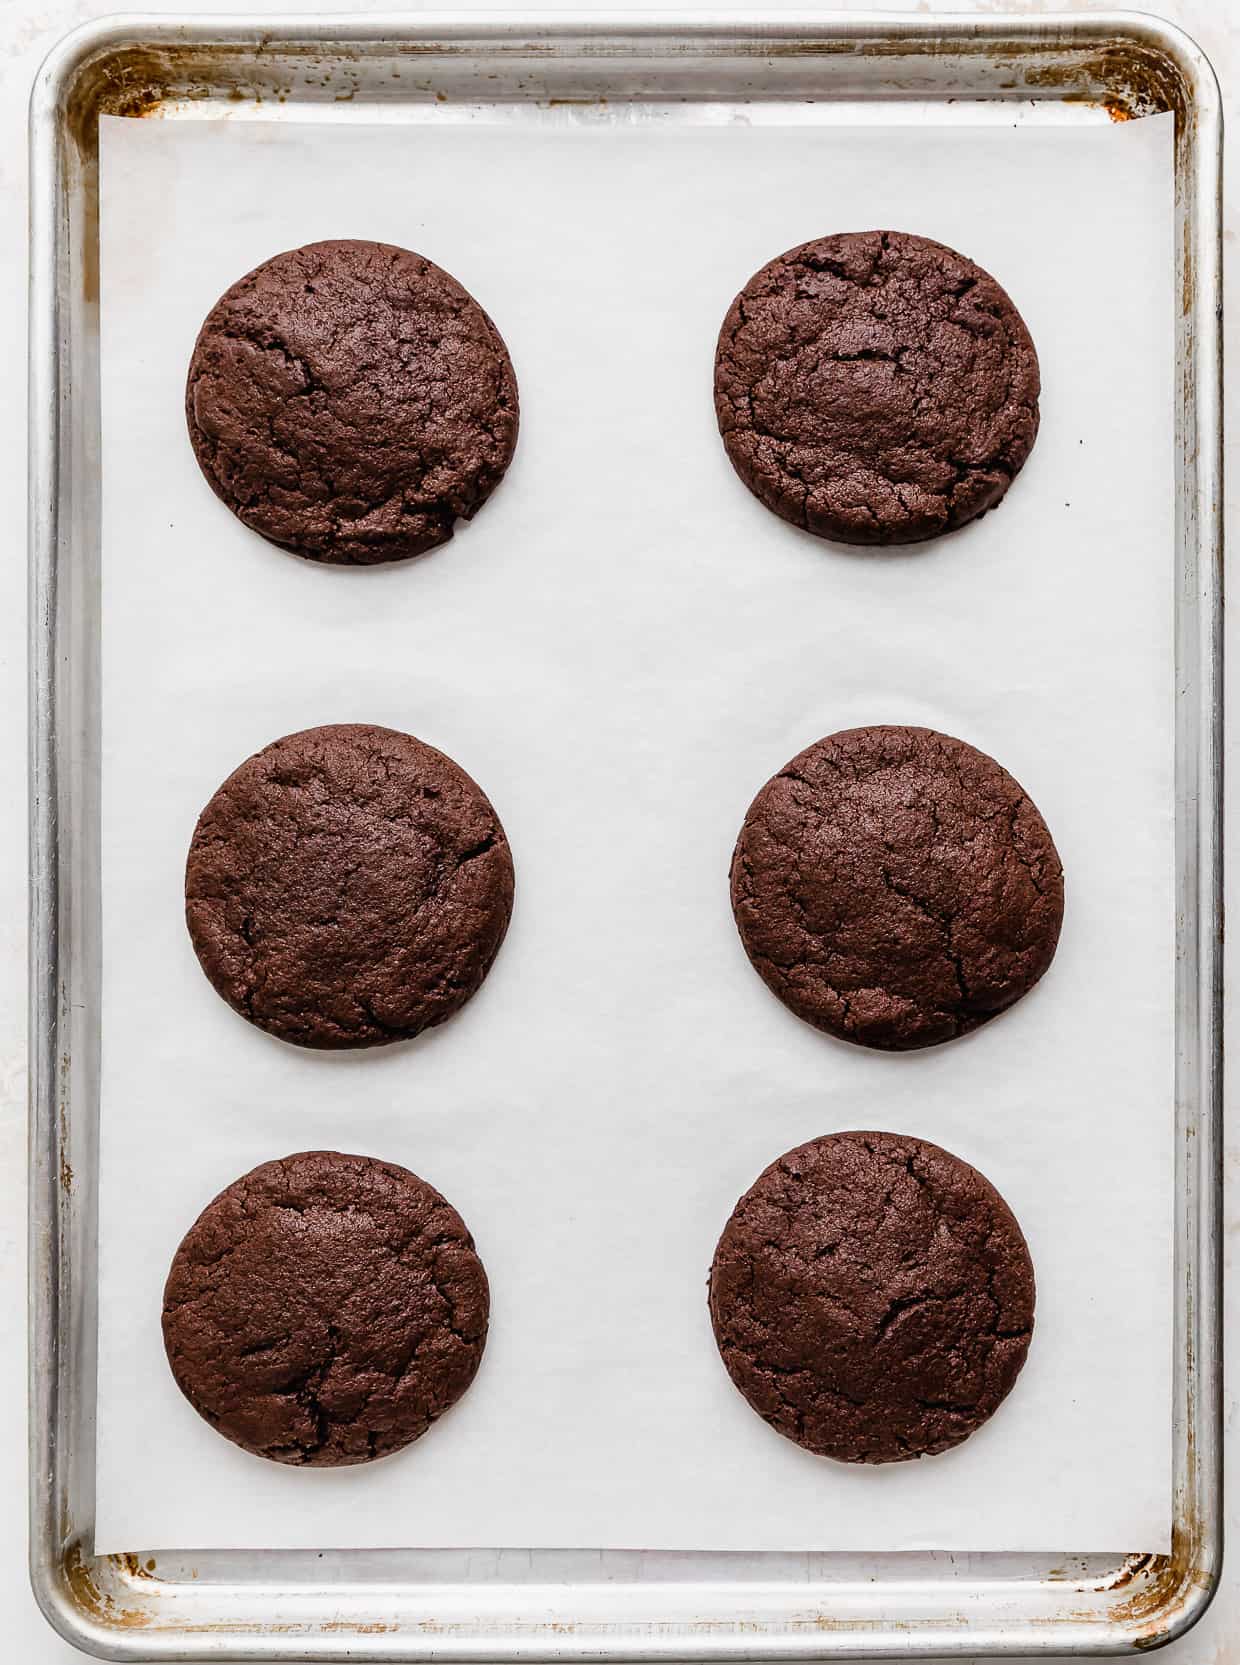 Six baked chocolate cookies on a white parchment paper lined baking sheet.